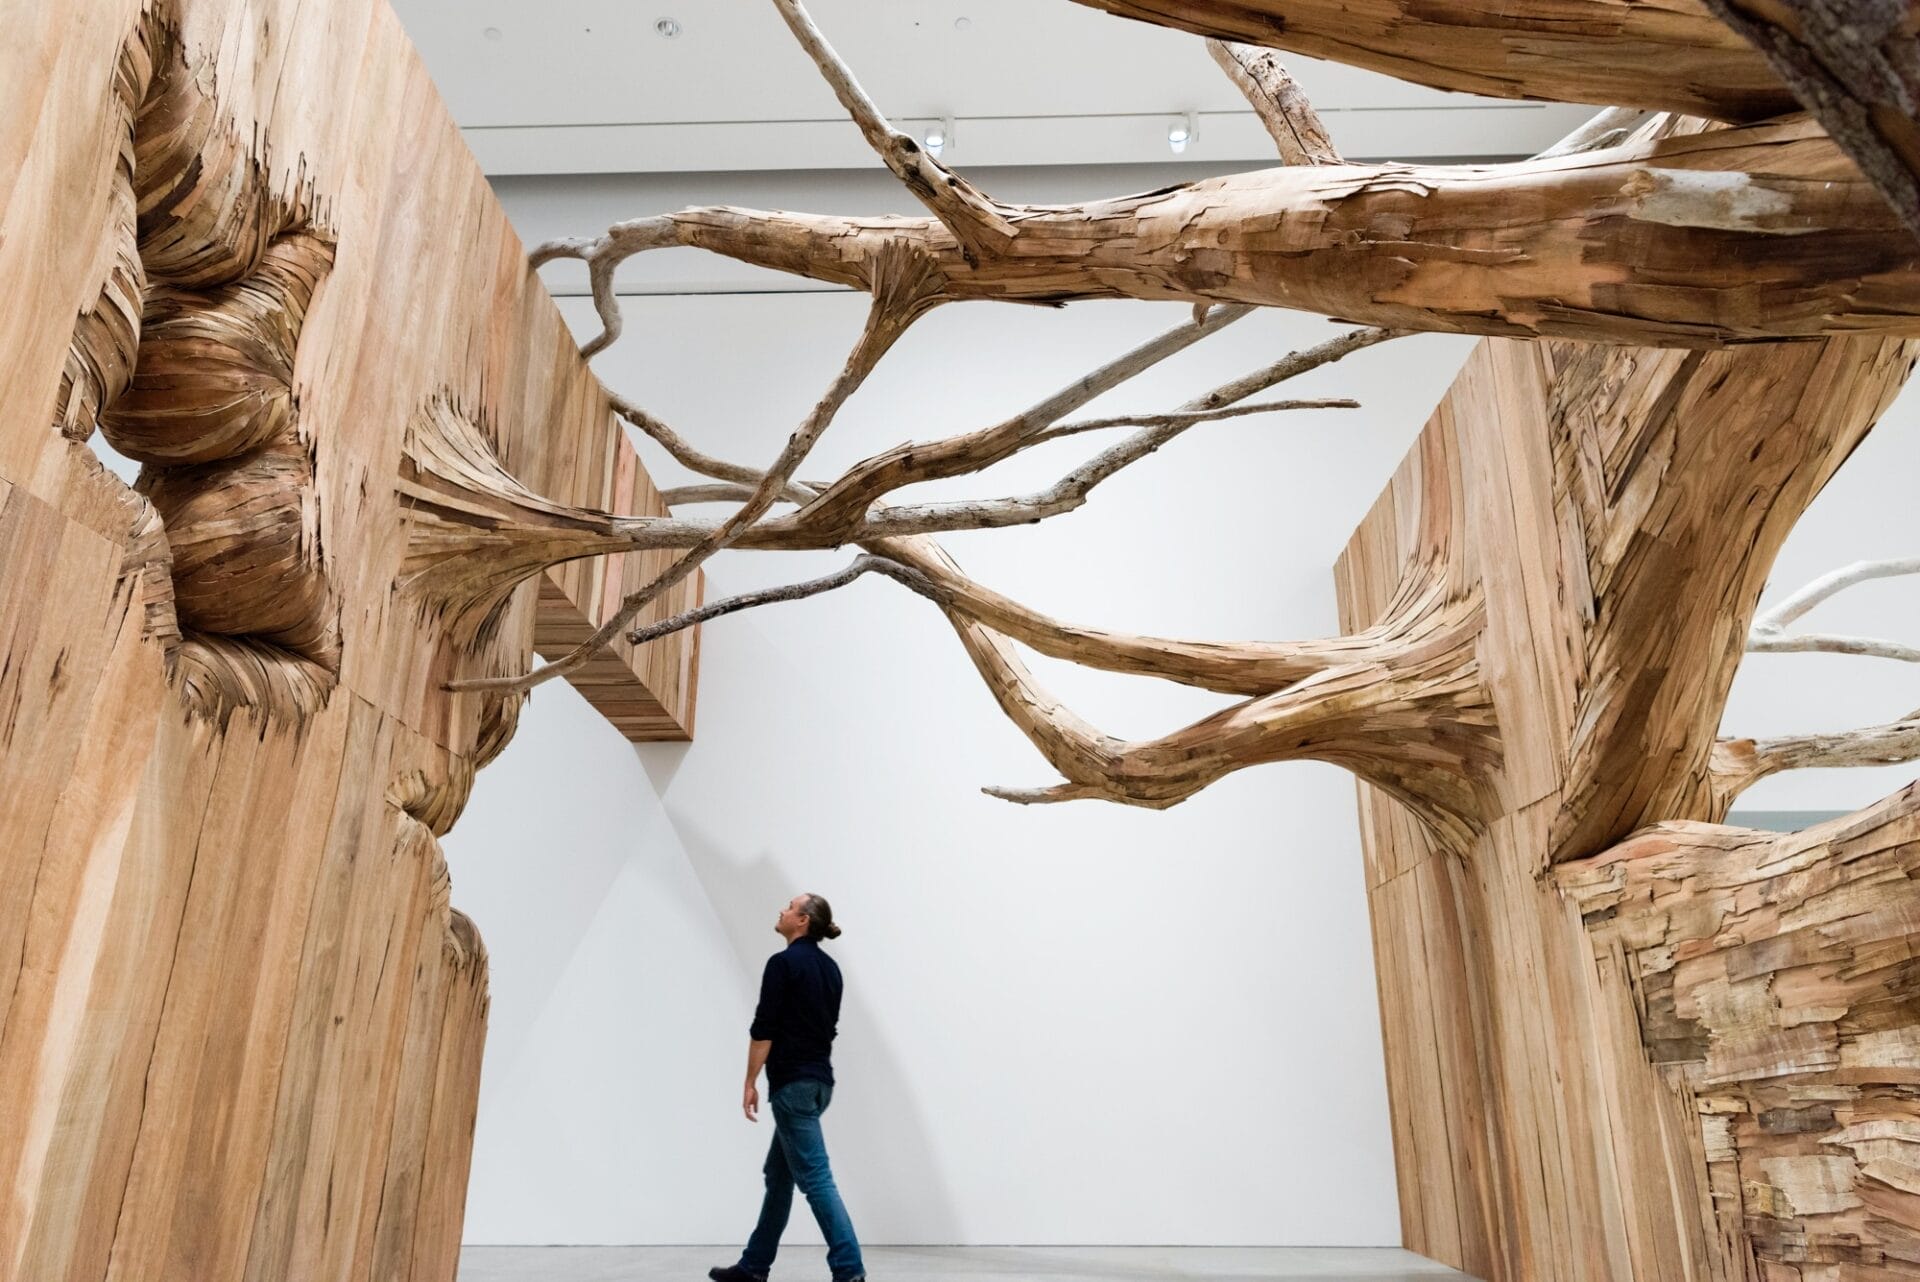 Detail of “Corupira” (2023), plywood, tapumes veneer, and tree branches, installation view of ‘Fairy Tales’ at Gallery of Modern Art Brisbane 2023. Photo by C Callistemon, © Henrique Oliveira and QAGOMA